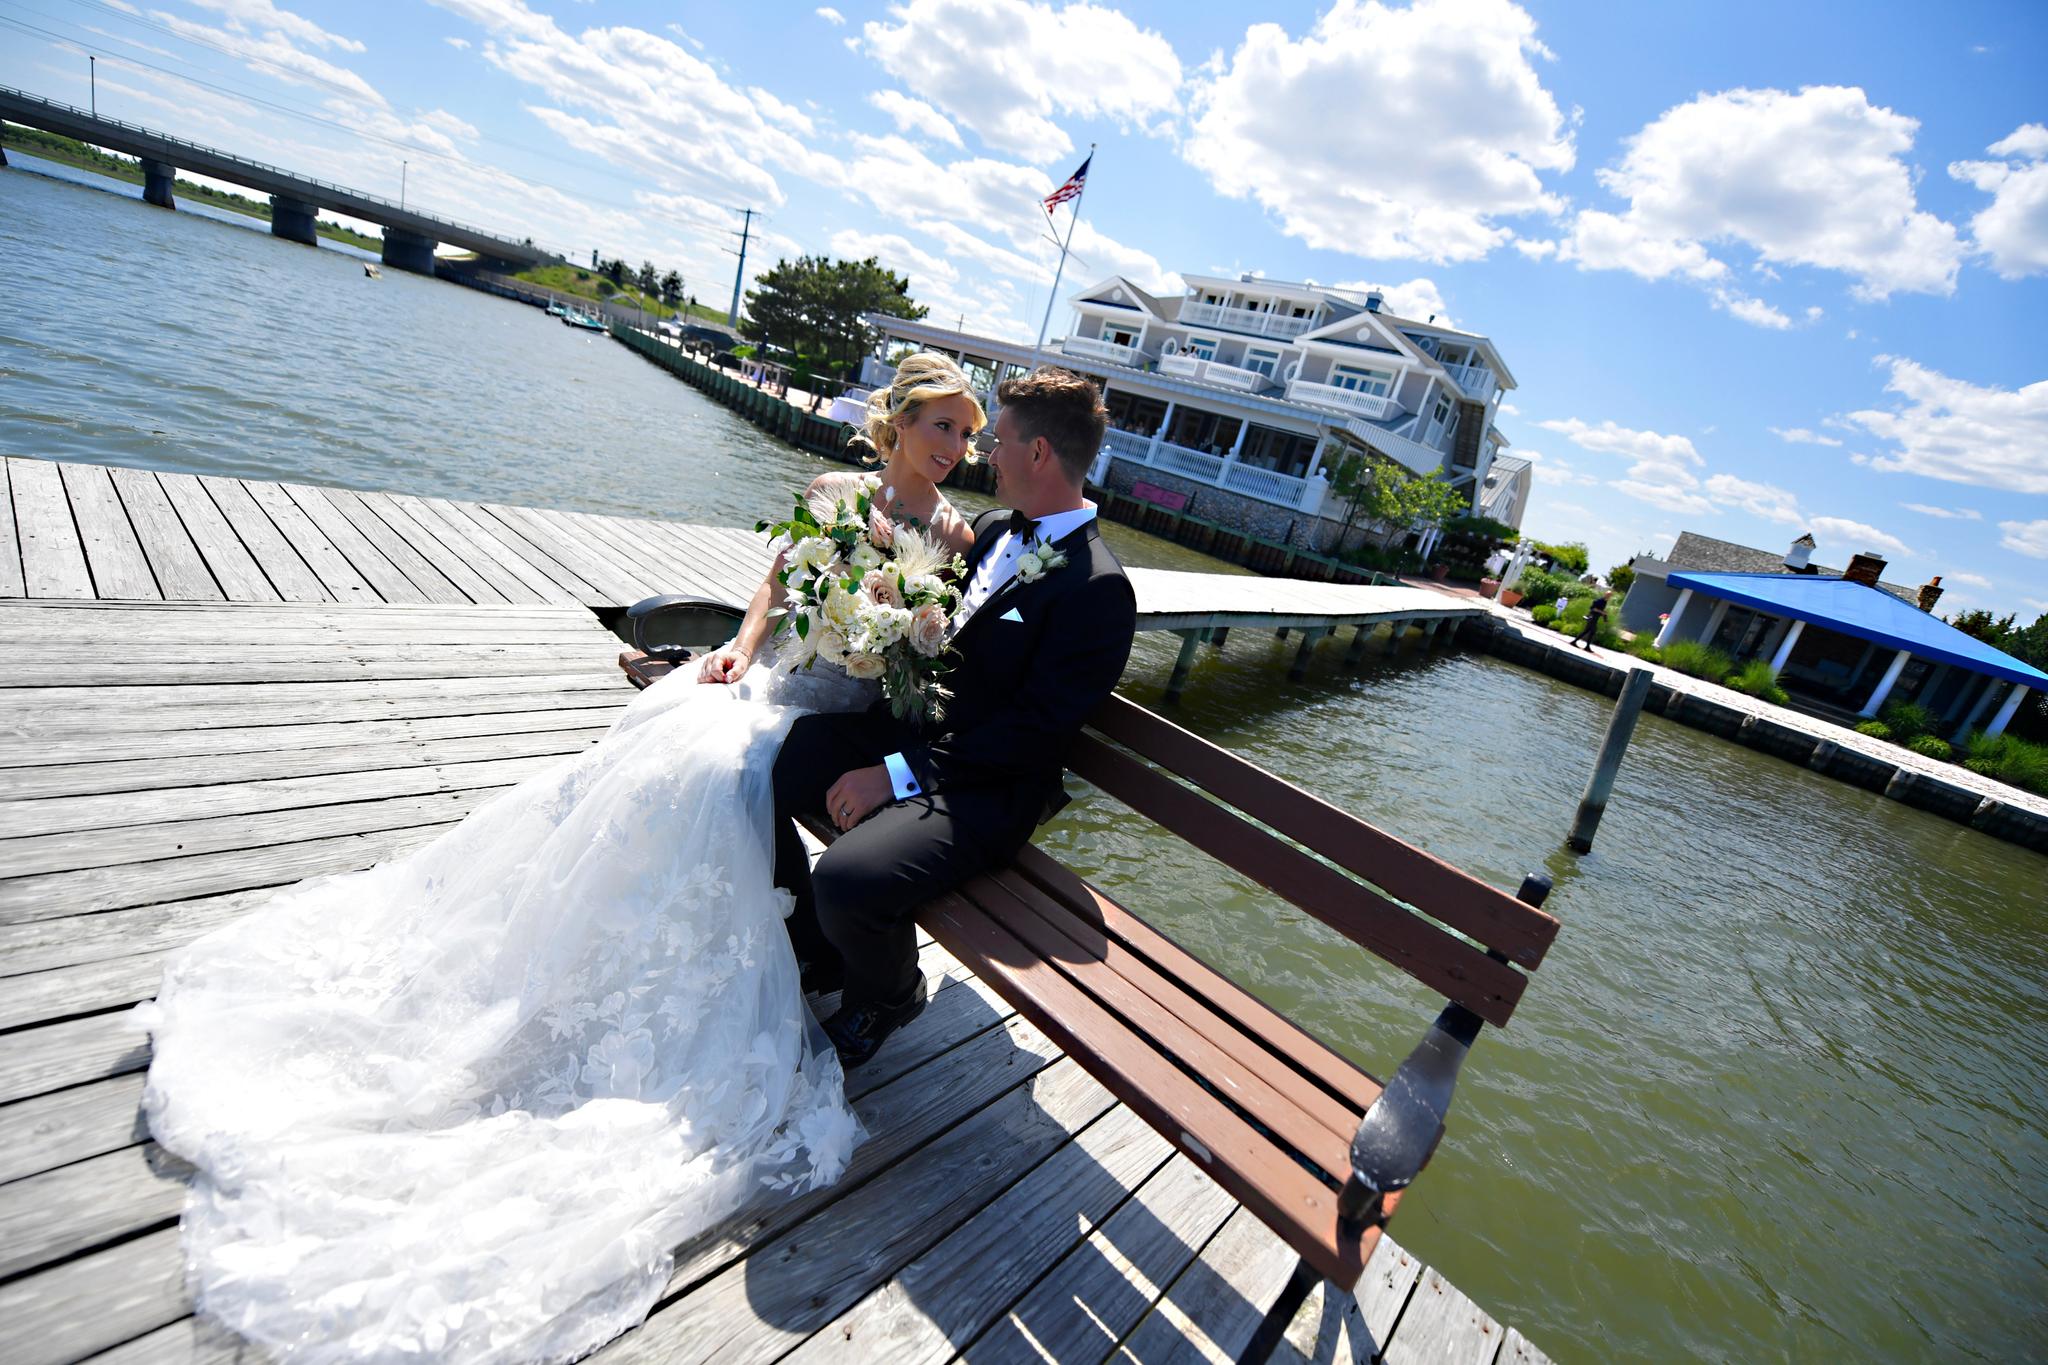 5 Amazing Wedding Venues in New Jersey